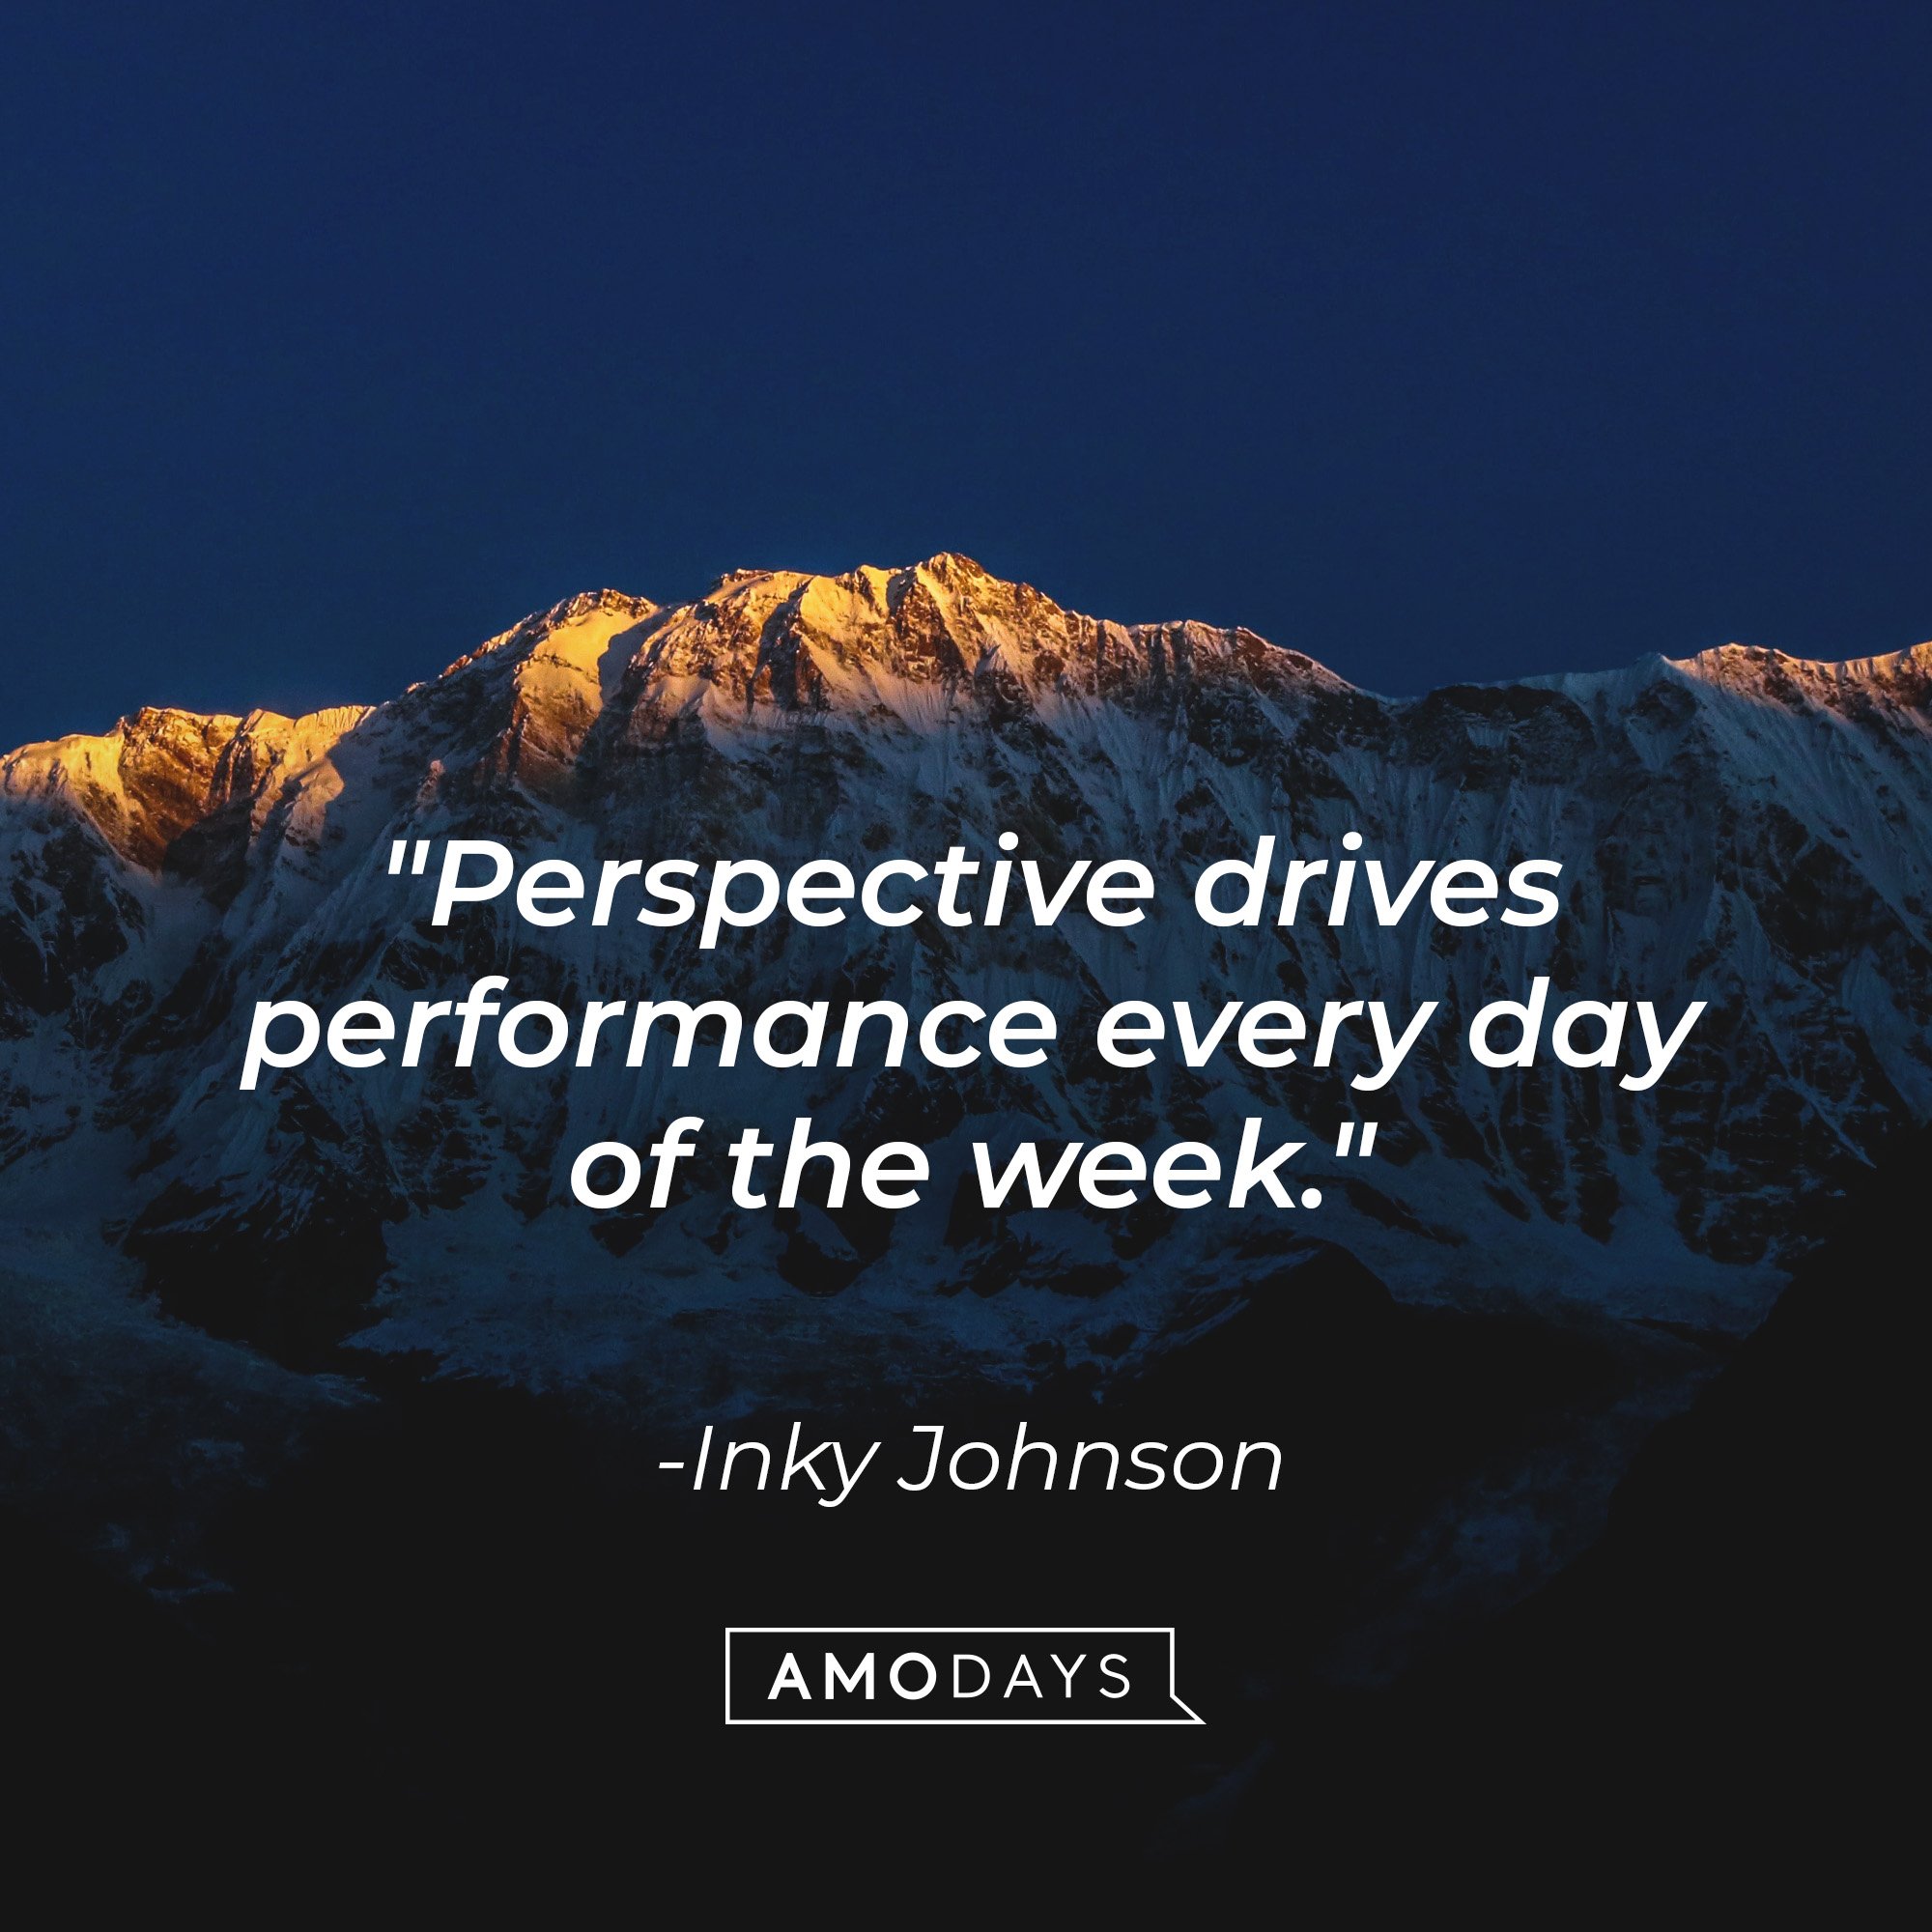 Inky Johnson's quote: "Perspective drives performance every day of the week." | Image: AmoDays